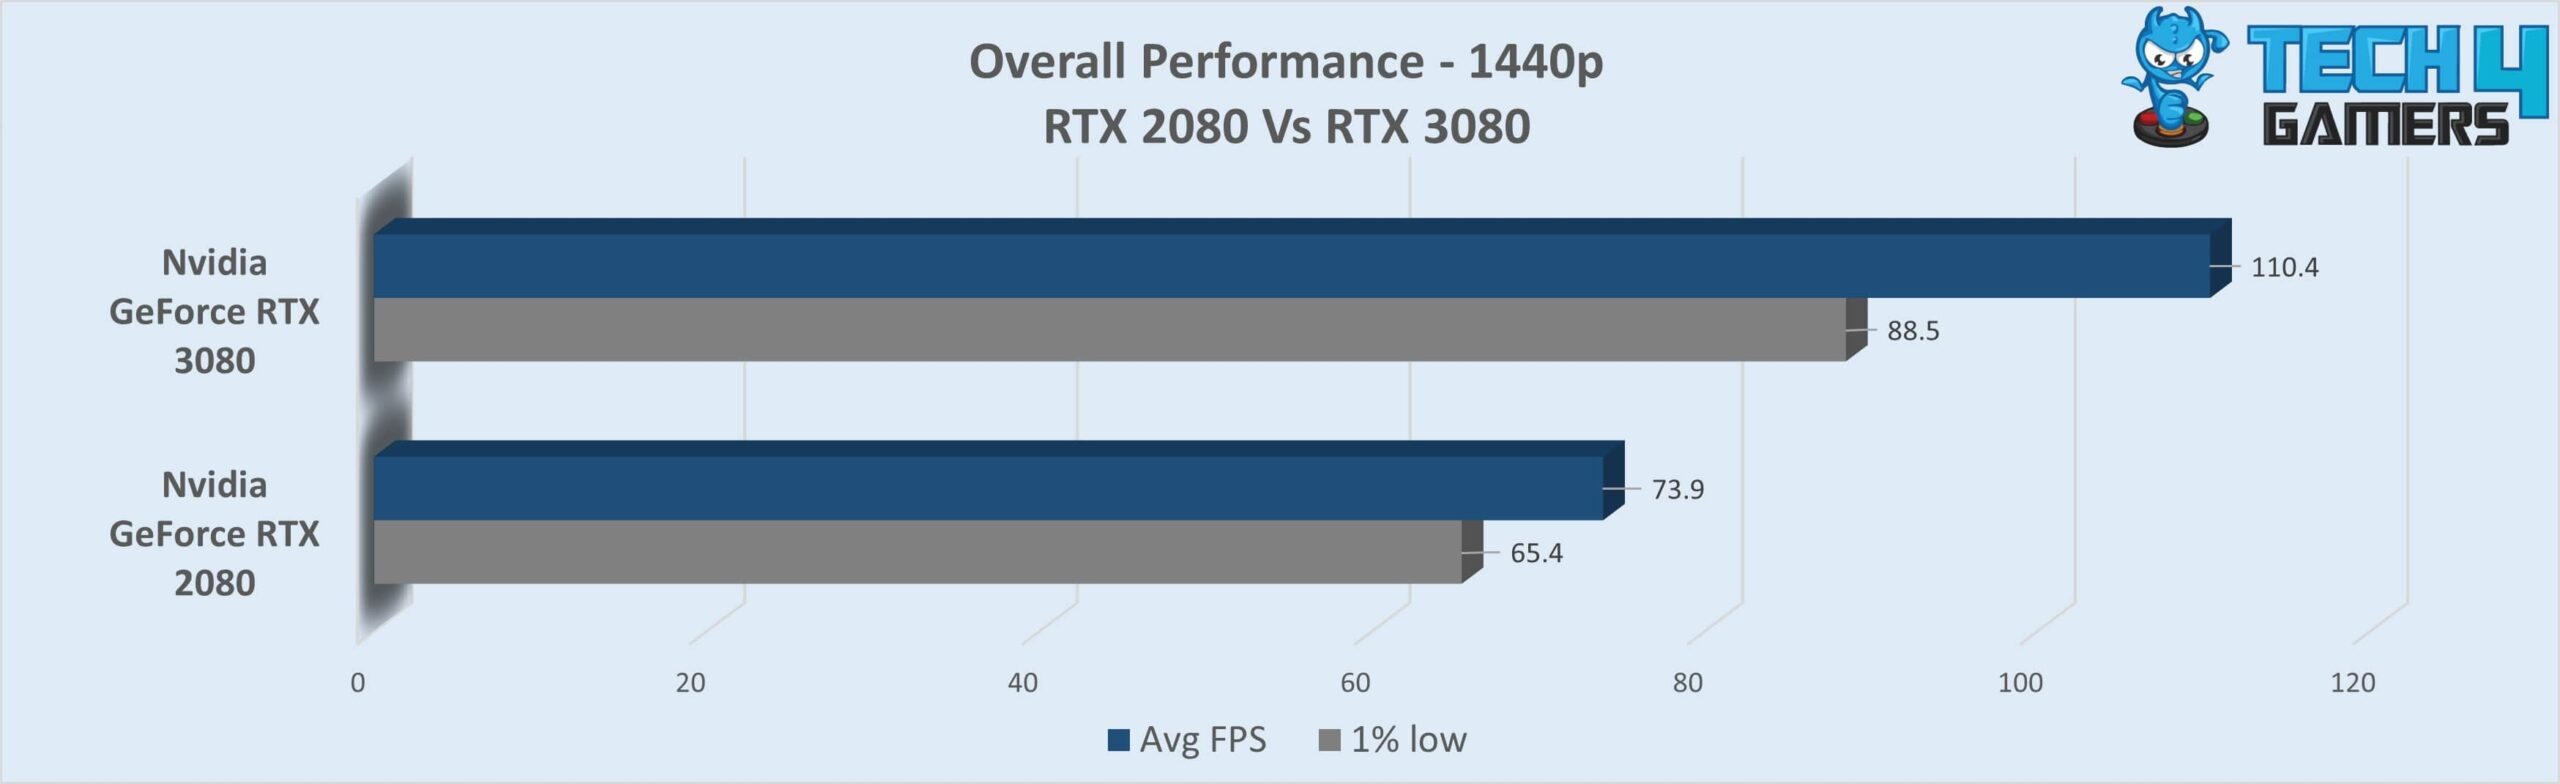 Overall Performance of 2 GPUs